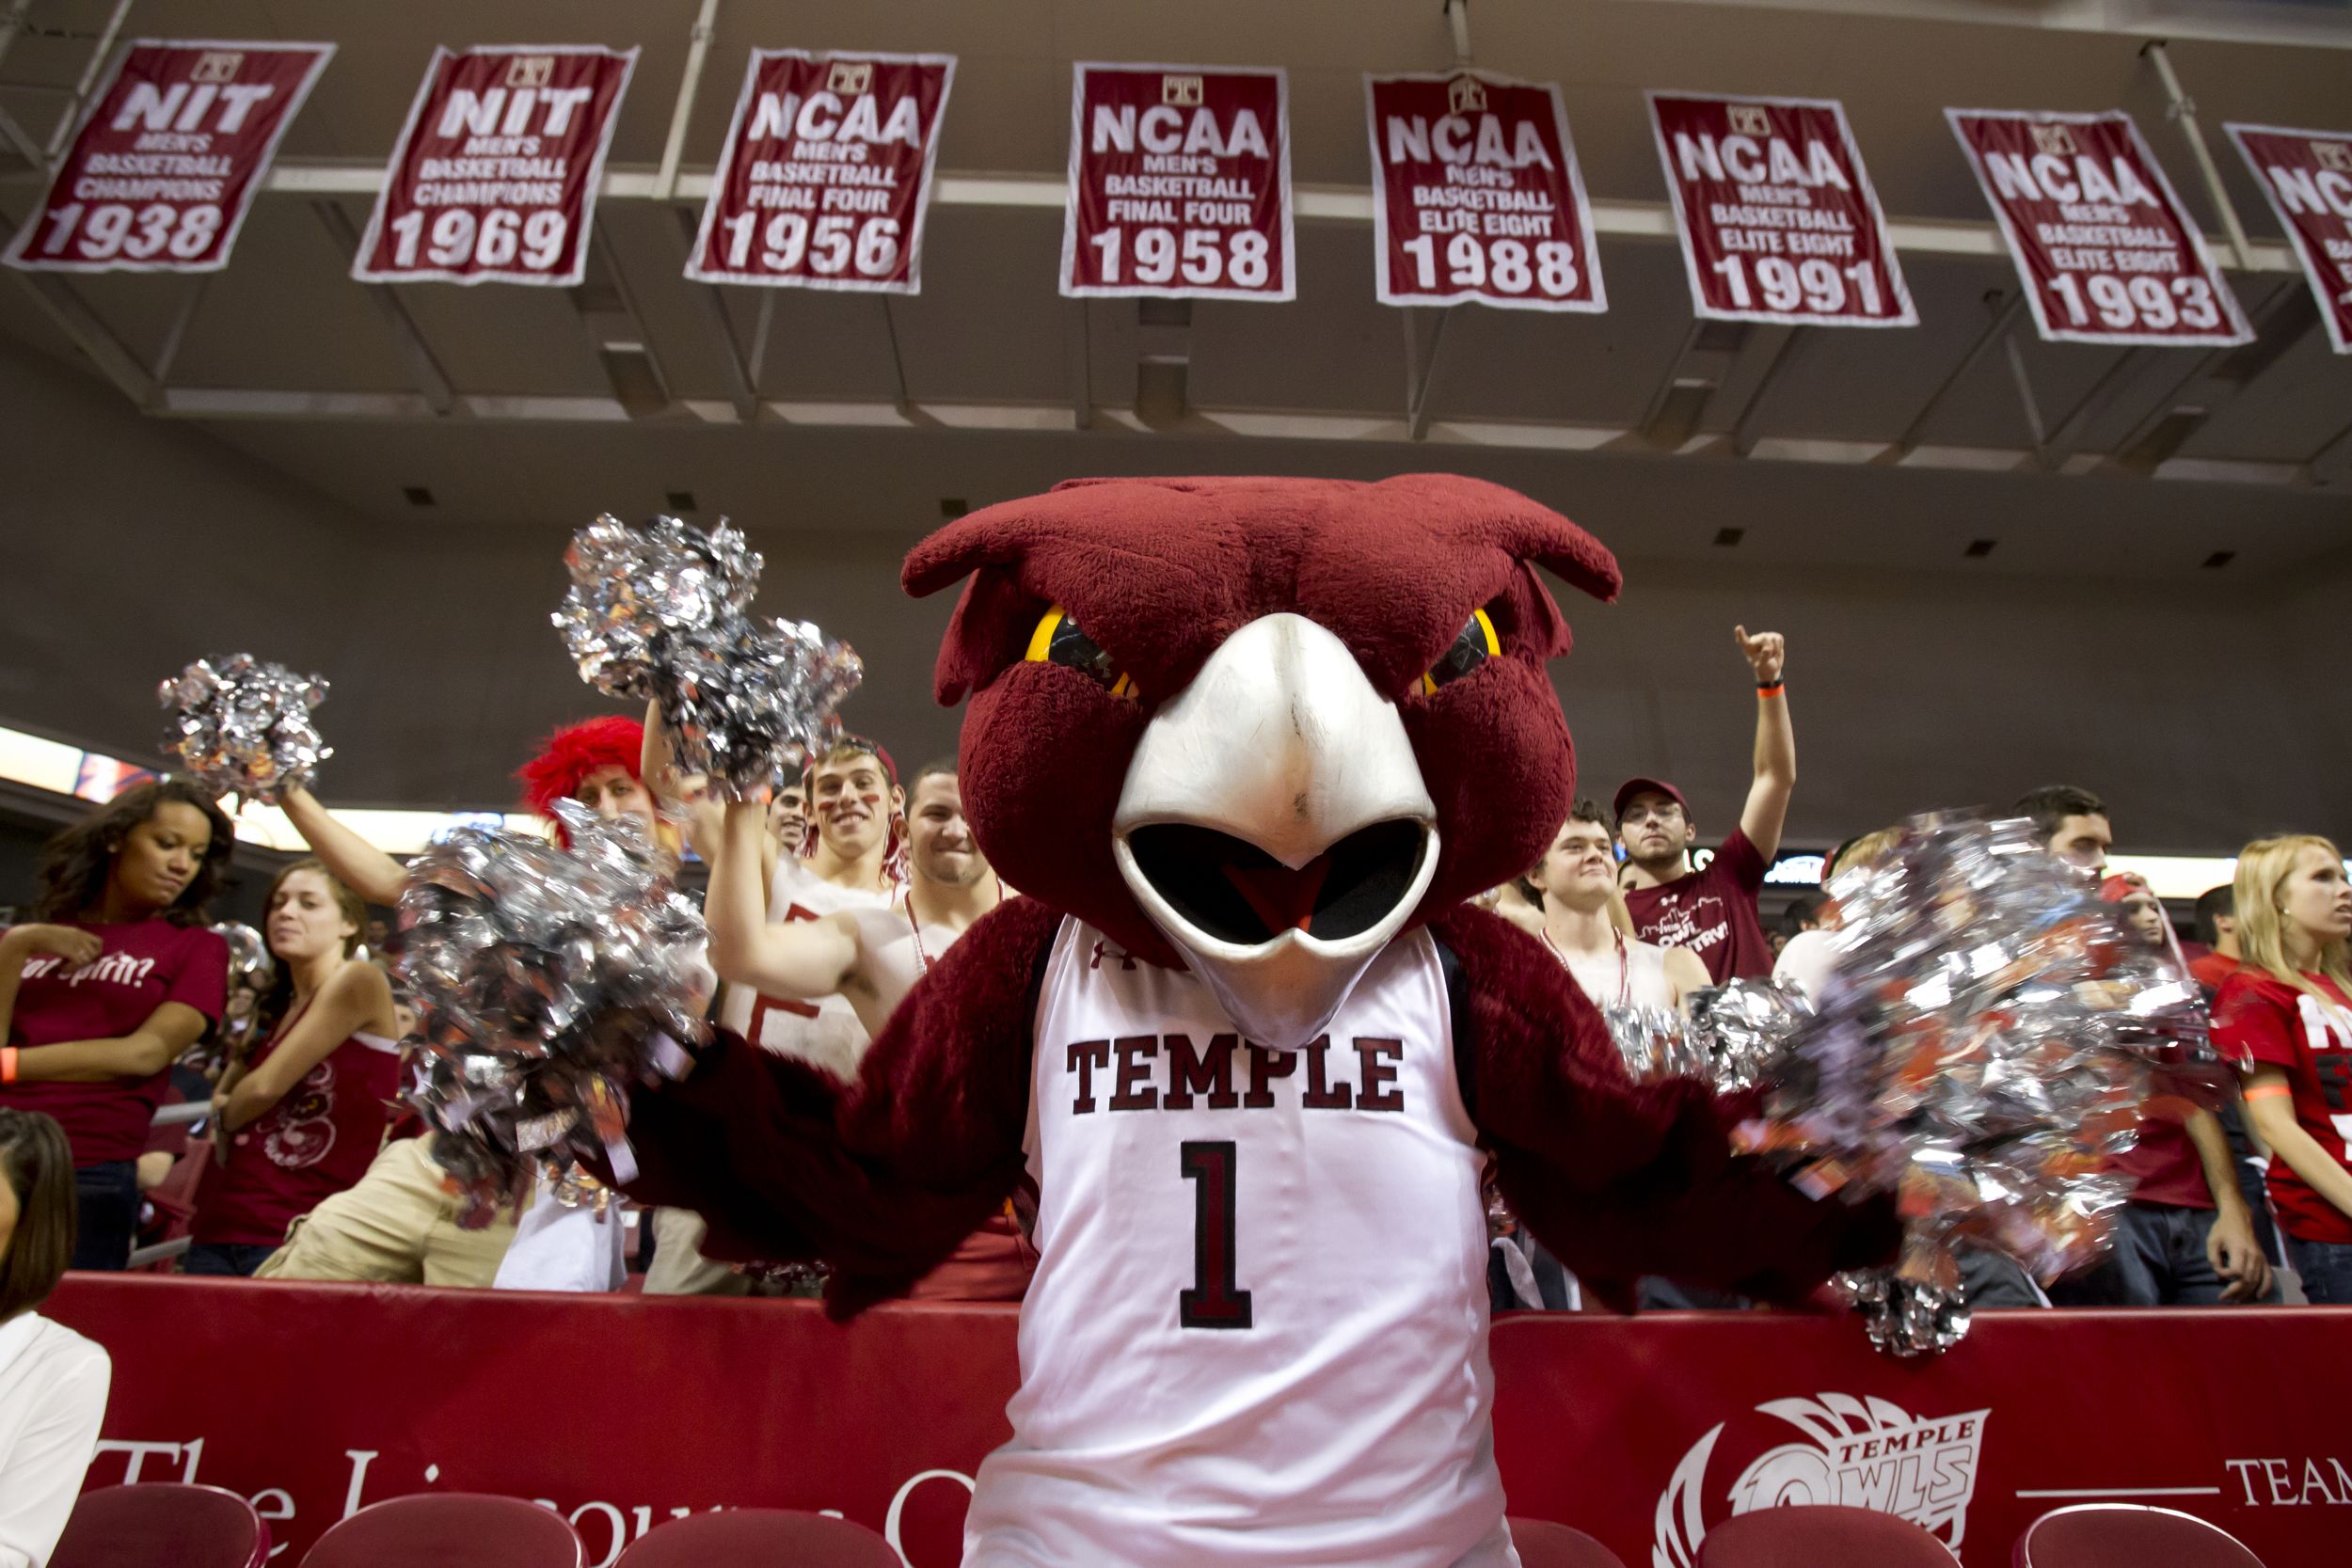 Hooter the Owl at a Temple basketball game.